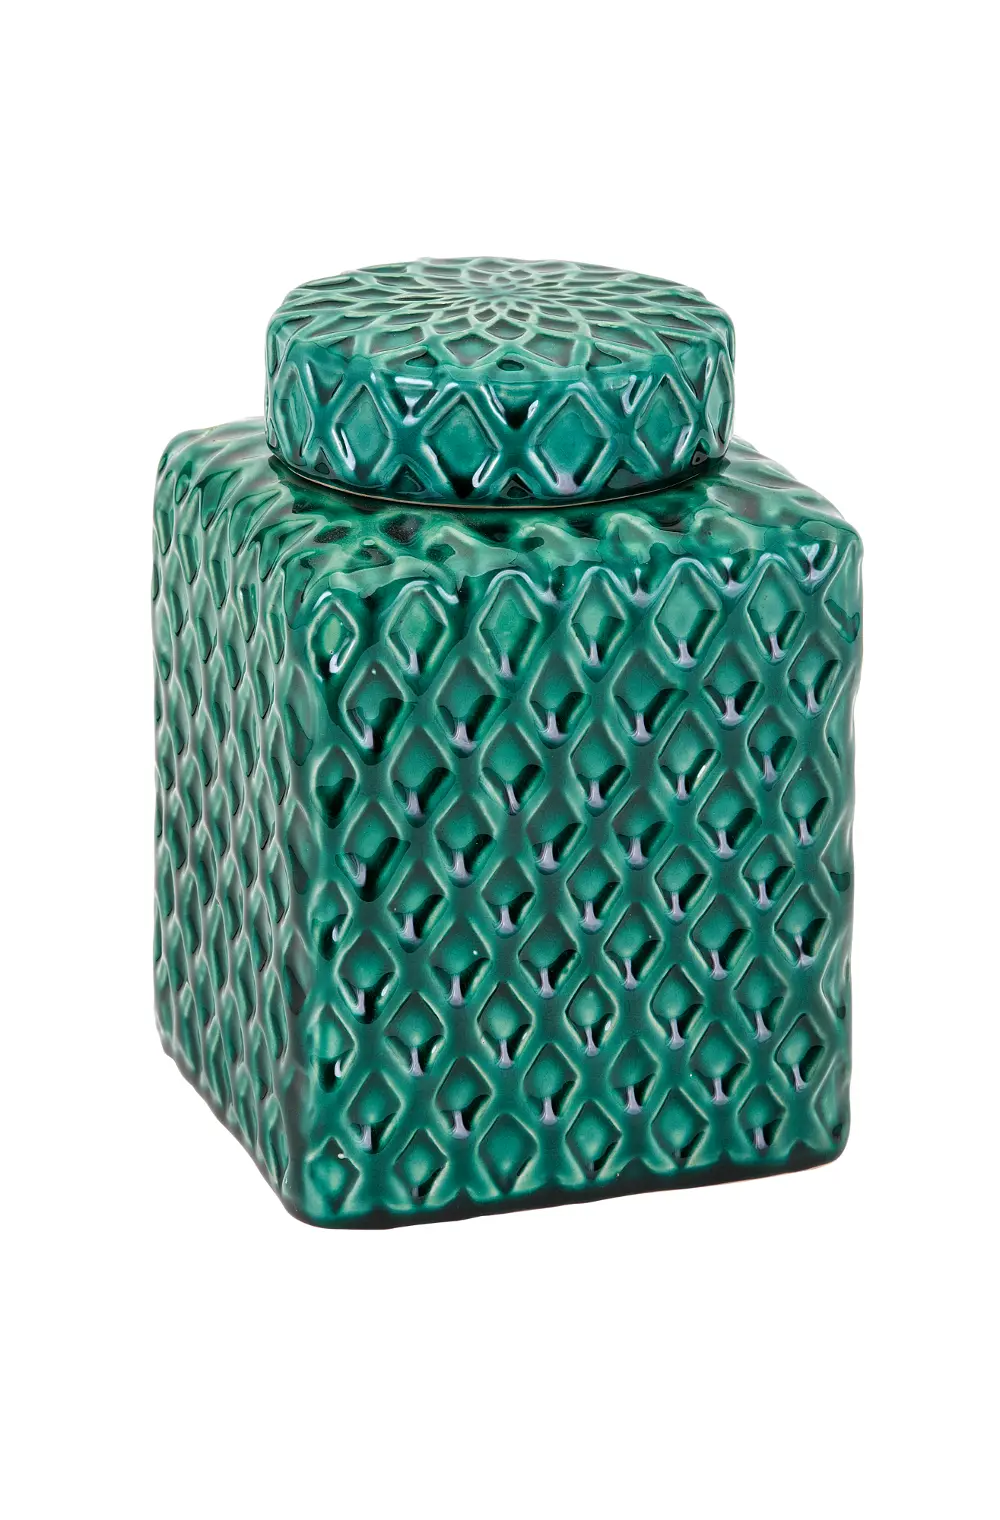 8 Inch Green Square Ceramic Lidded Container-1